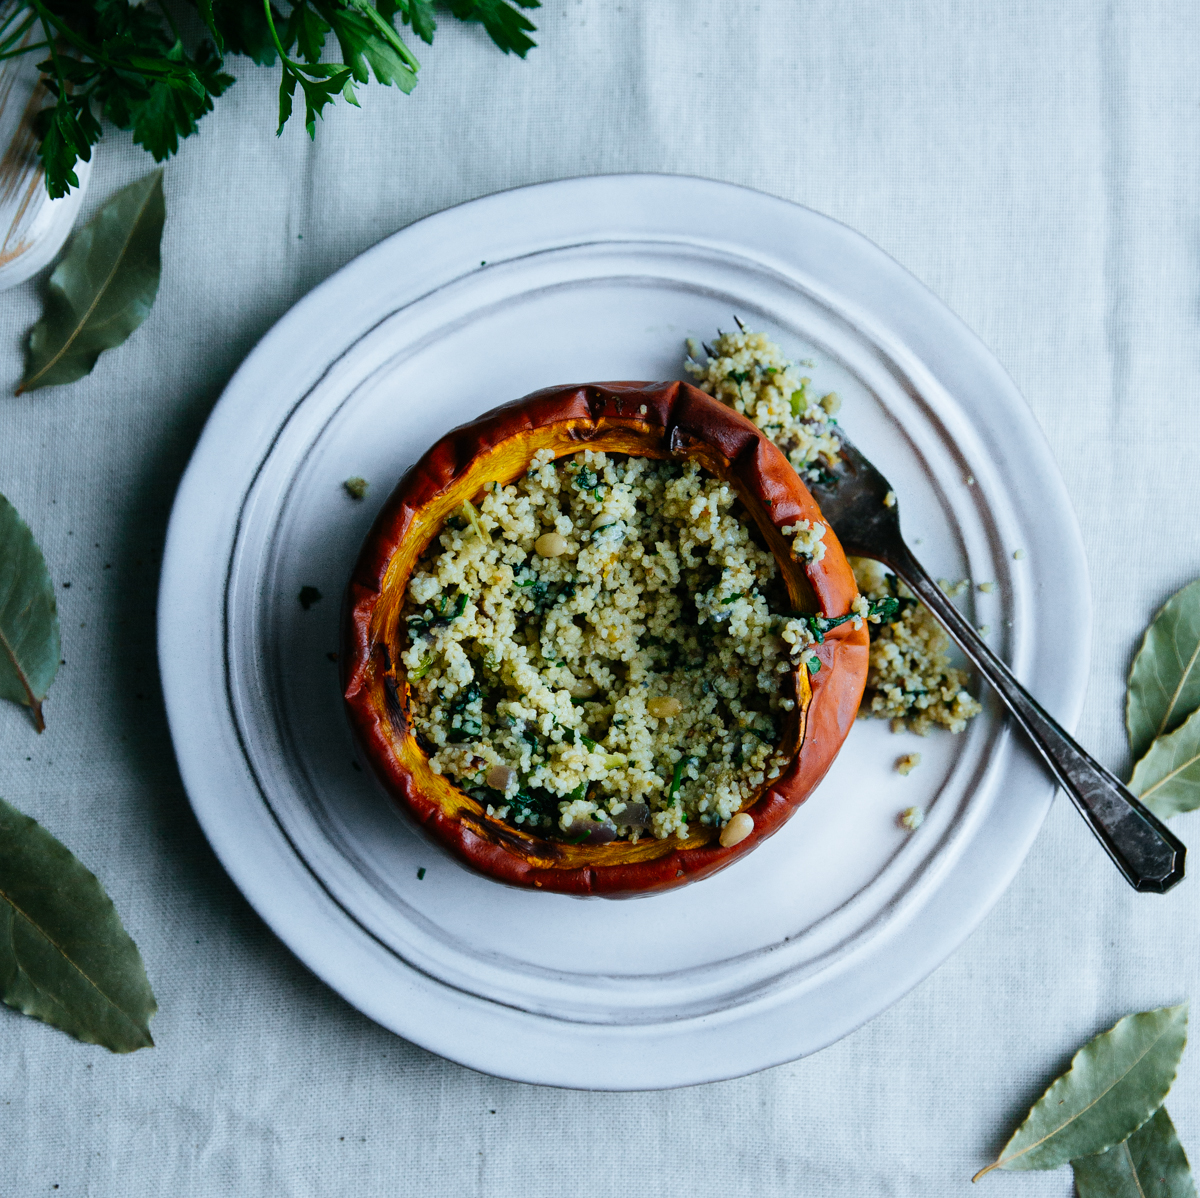 Baked pumpkins, stuffed with couscous, blue cheese & pine nuts